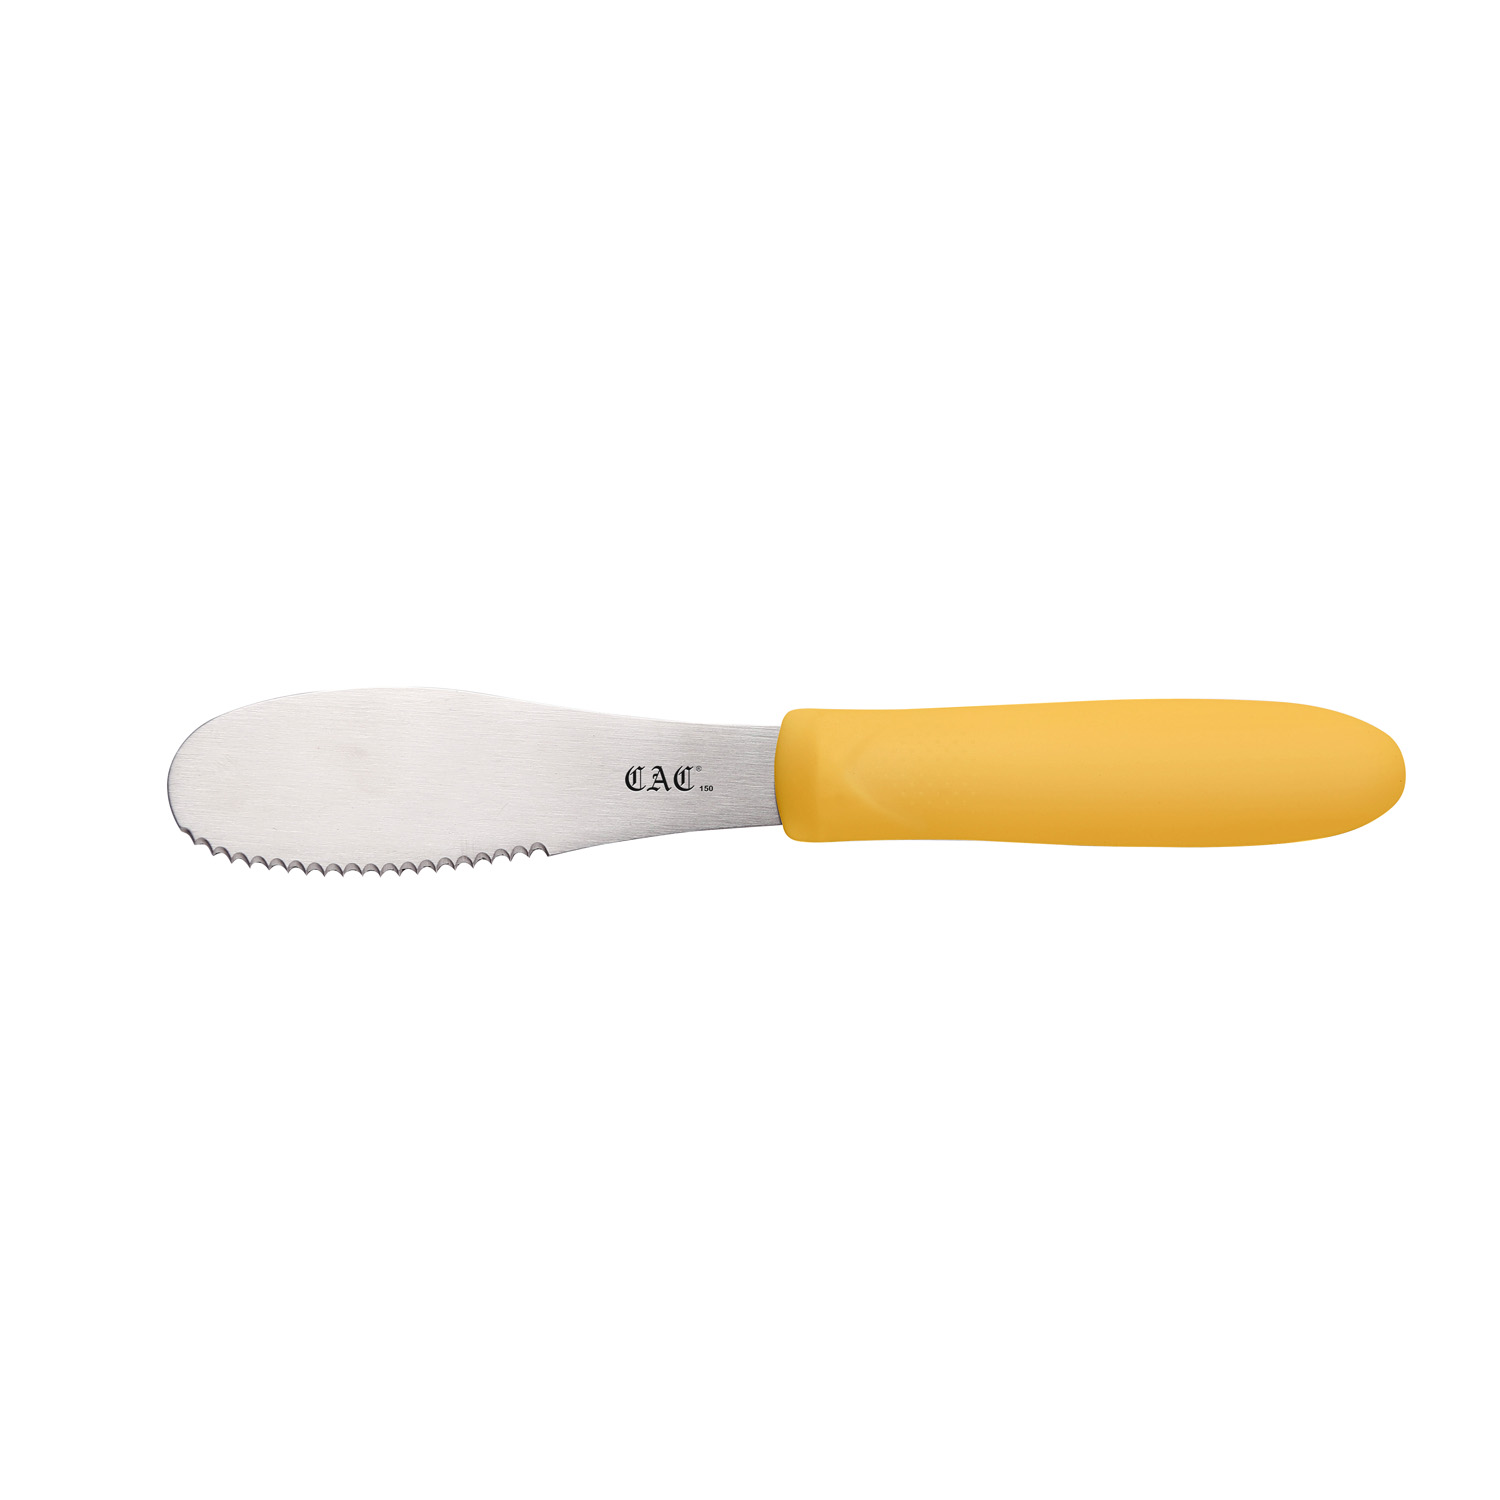 CAC China SPSP-4YL Yellow Serrated Spreader with Plastic Handle 3-7/8"